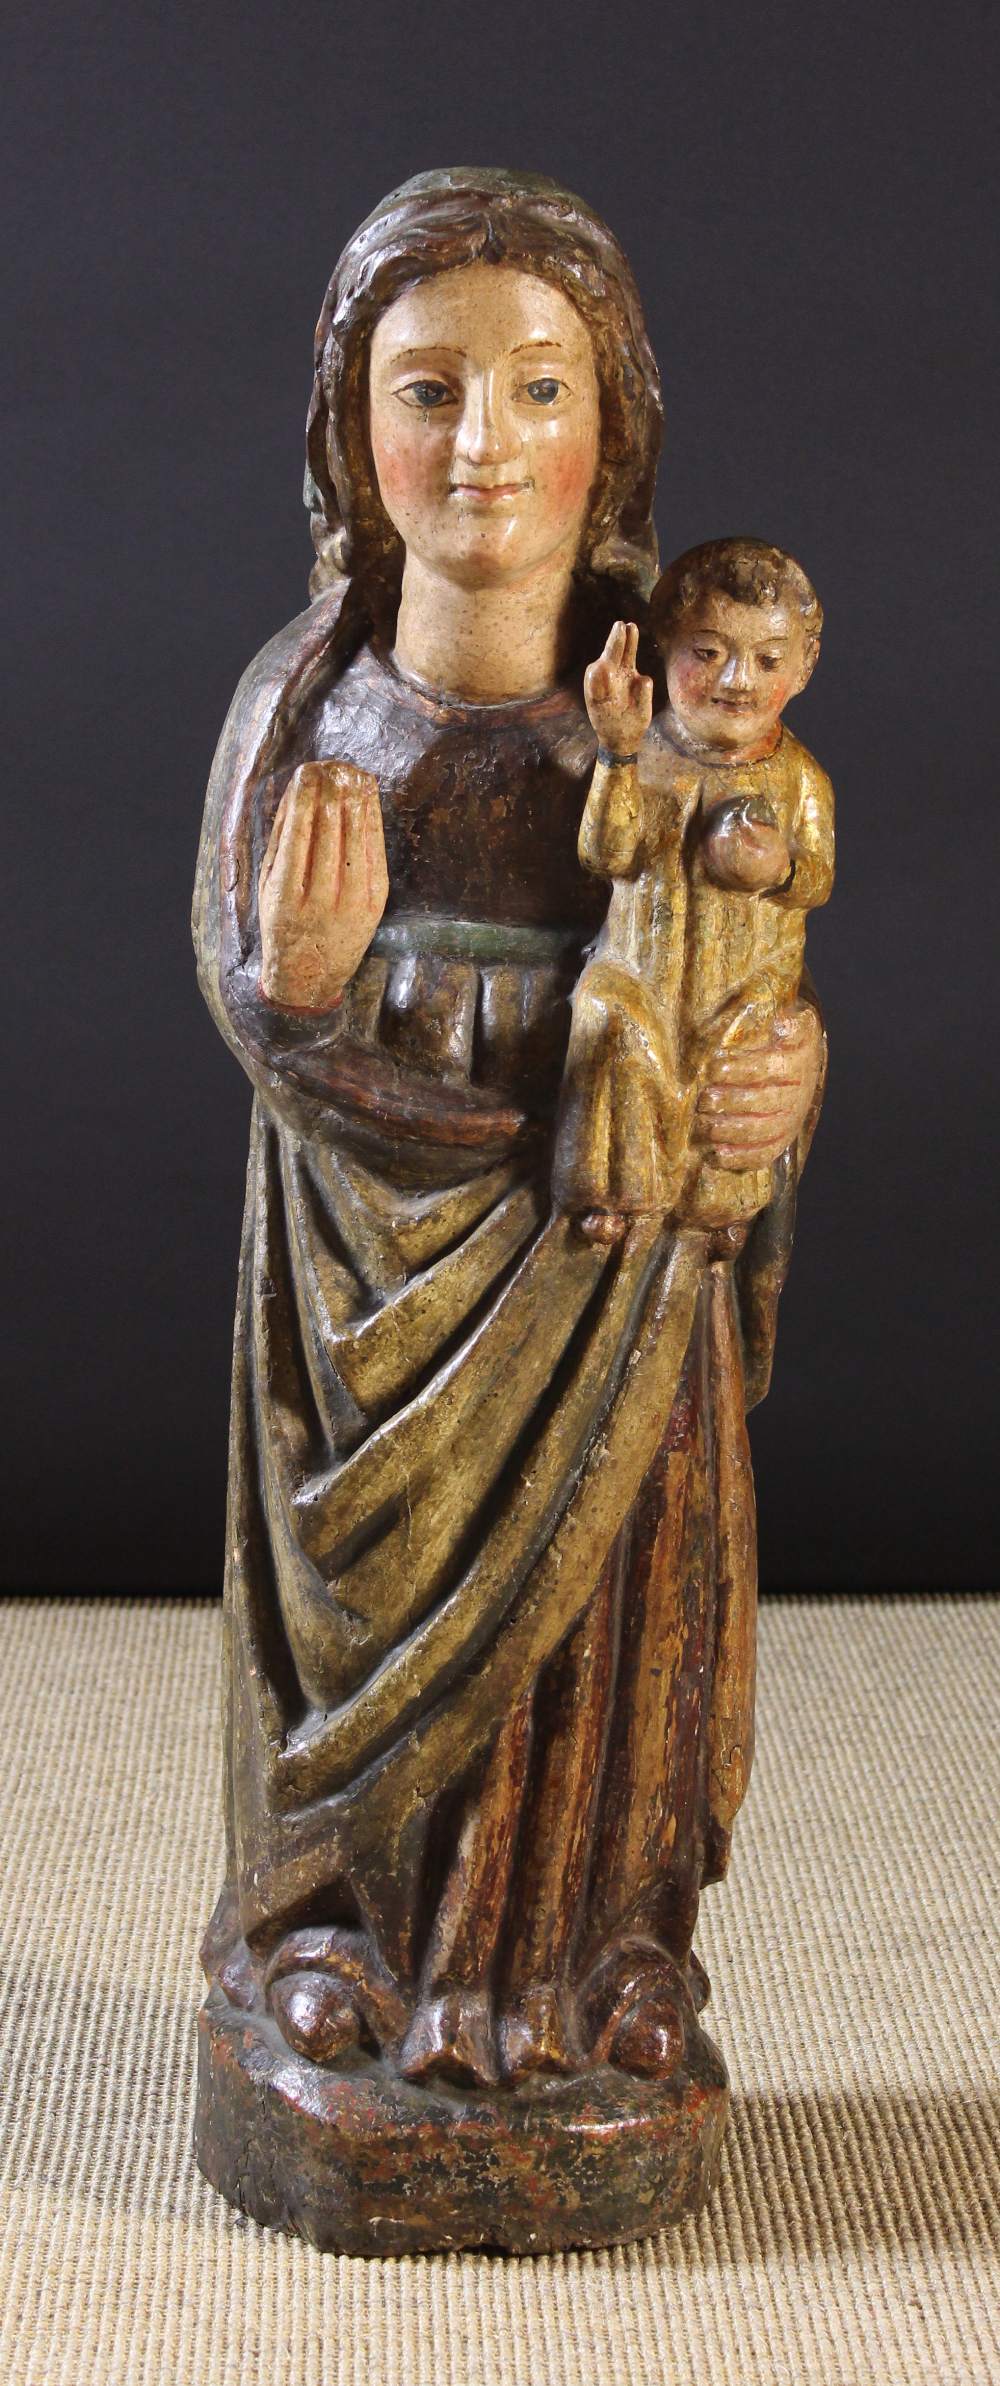 A 15th/16th Century Polychromed Carving